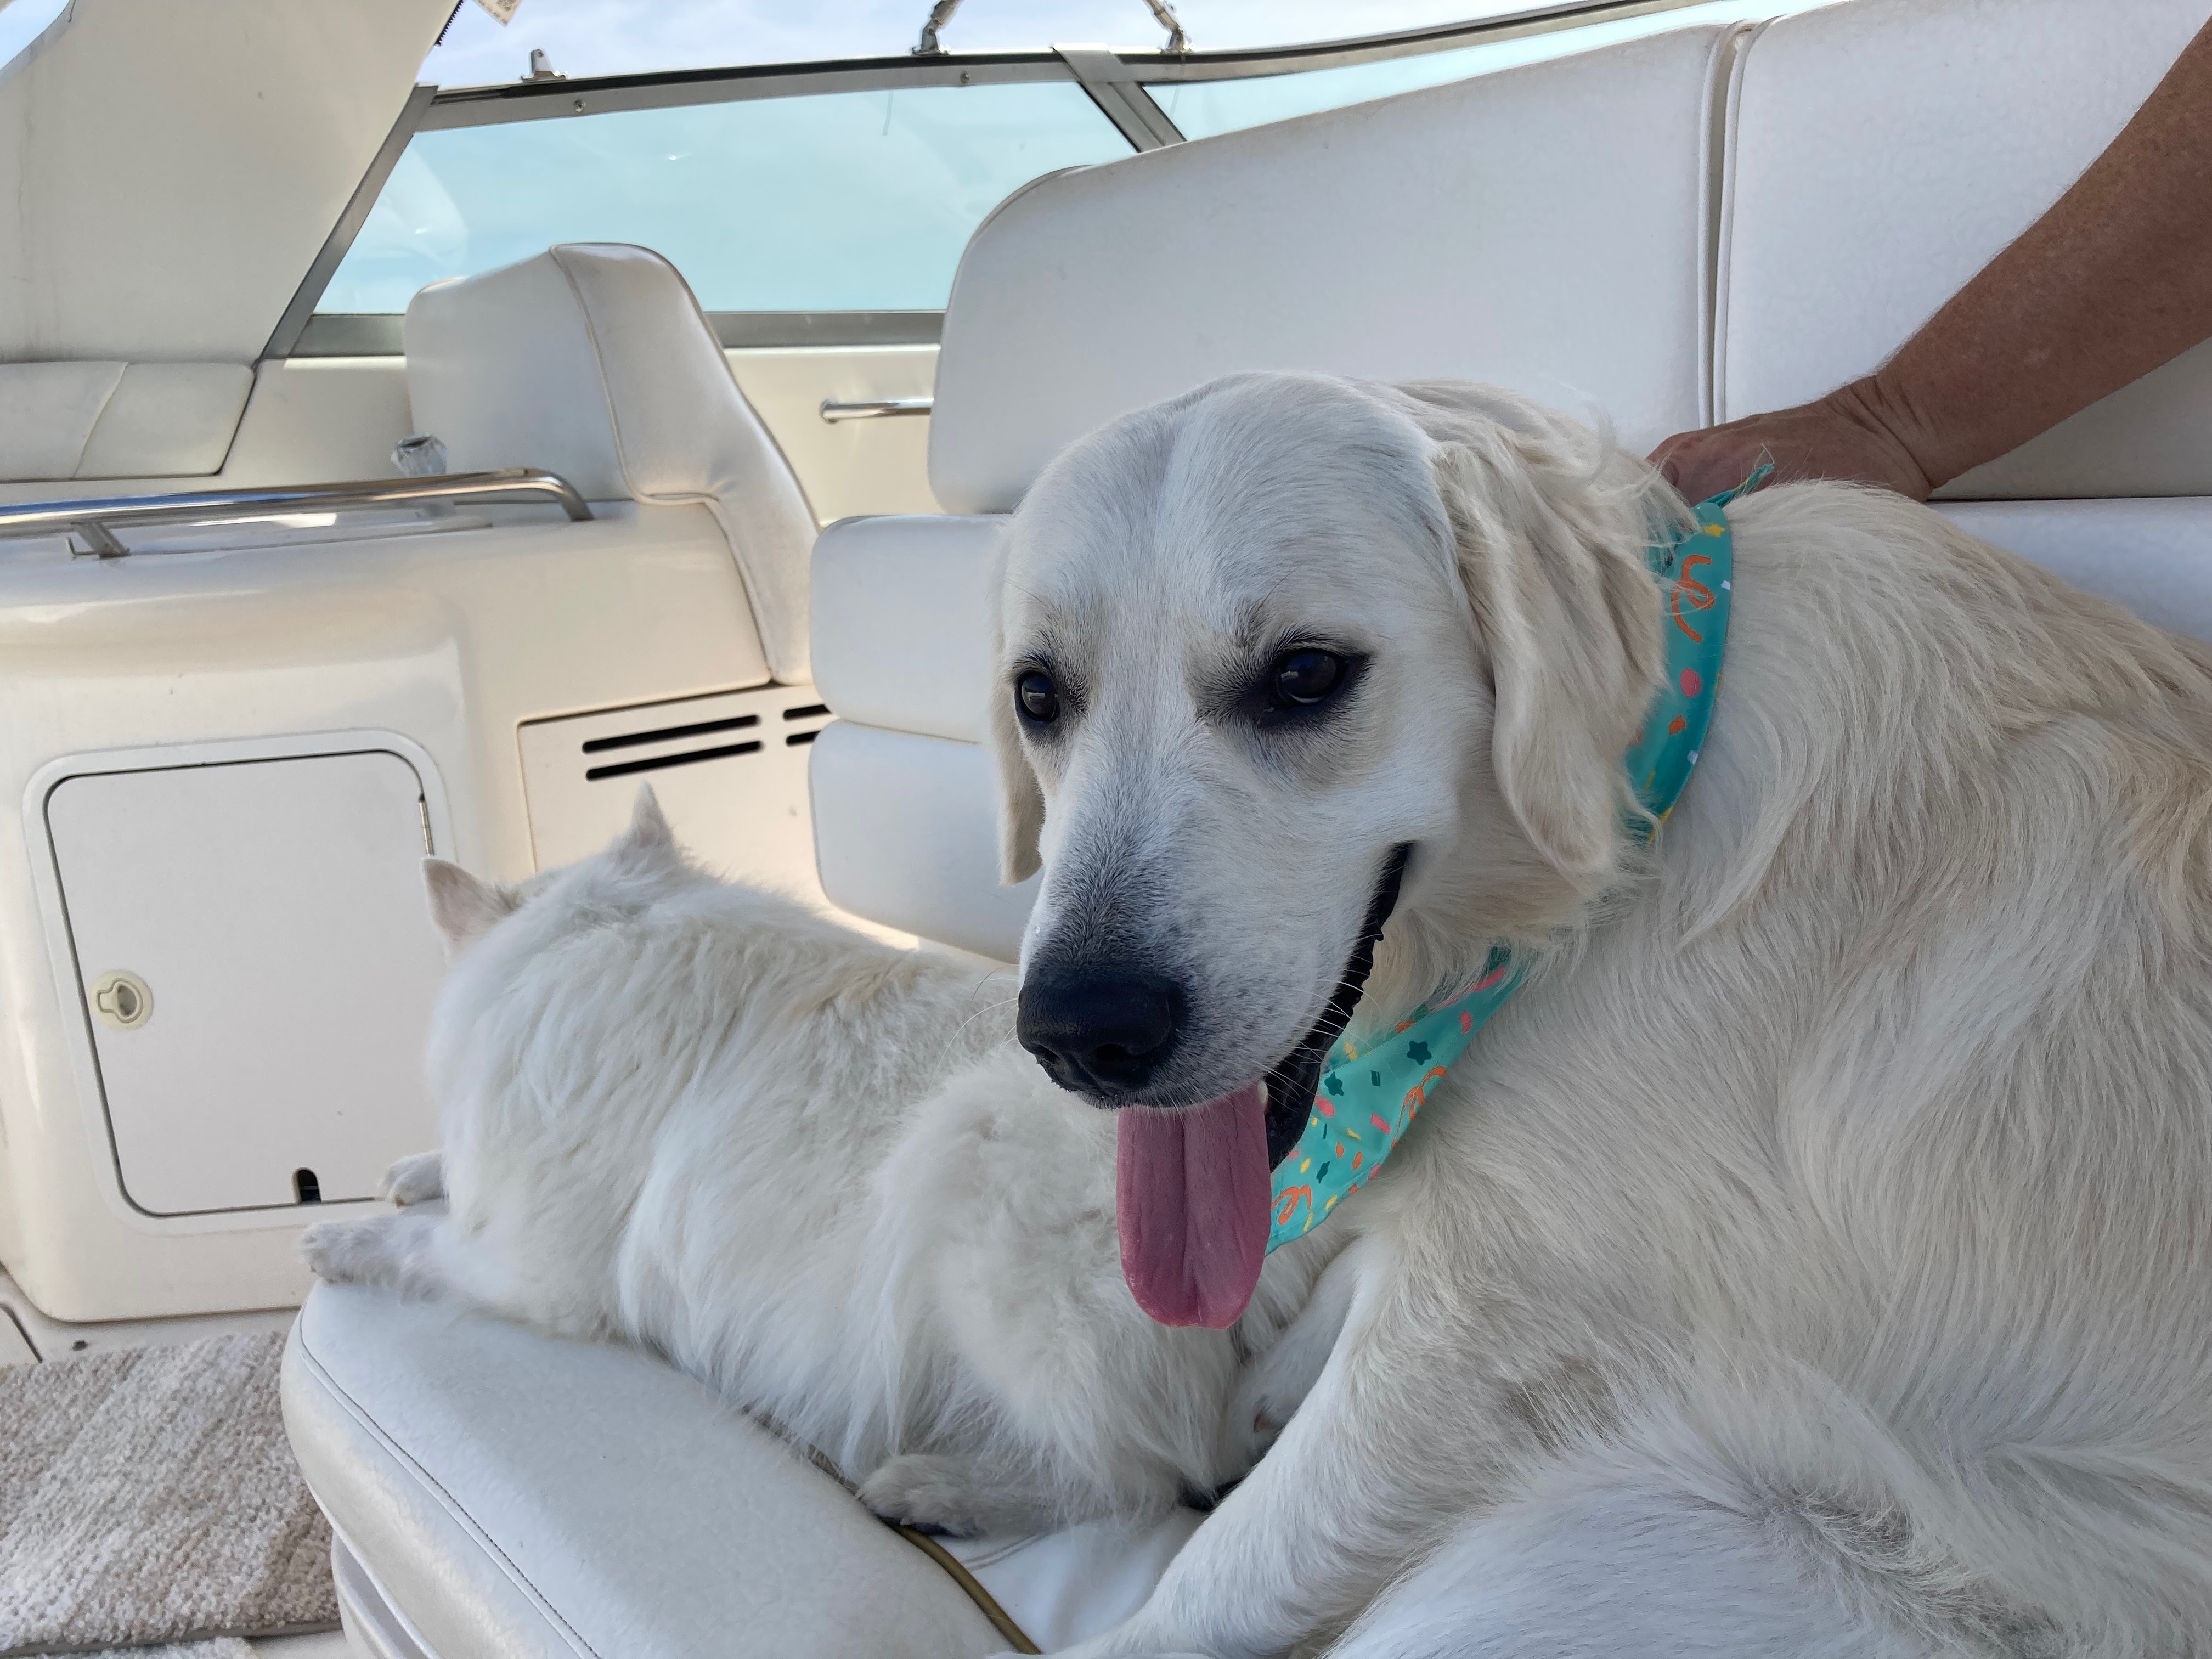 North with Tucker, on the boat